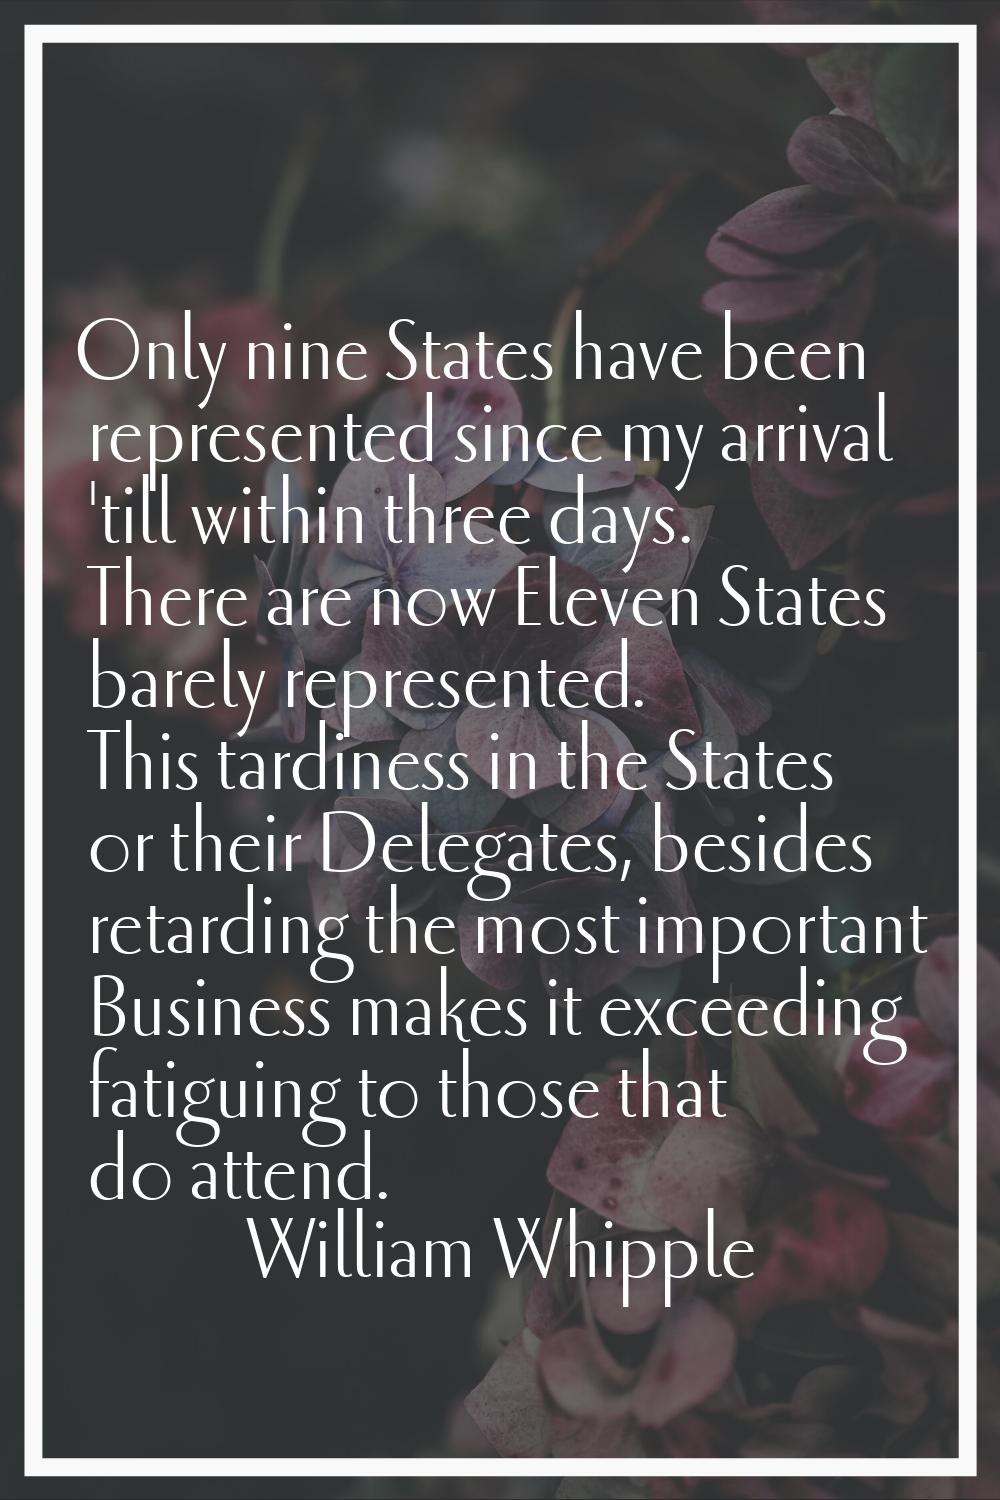 Only nine States have been represented since my arrival 'till within three days. There are now Elev